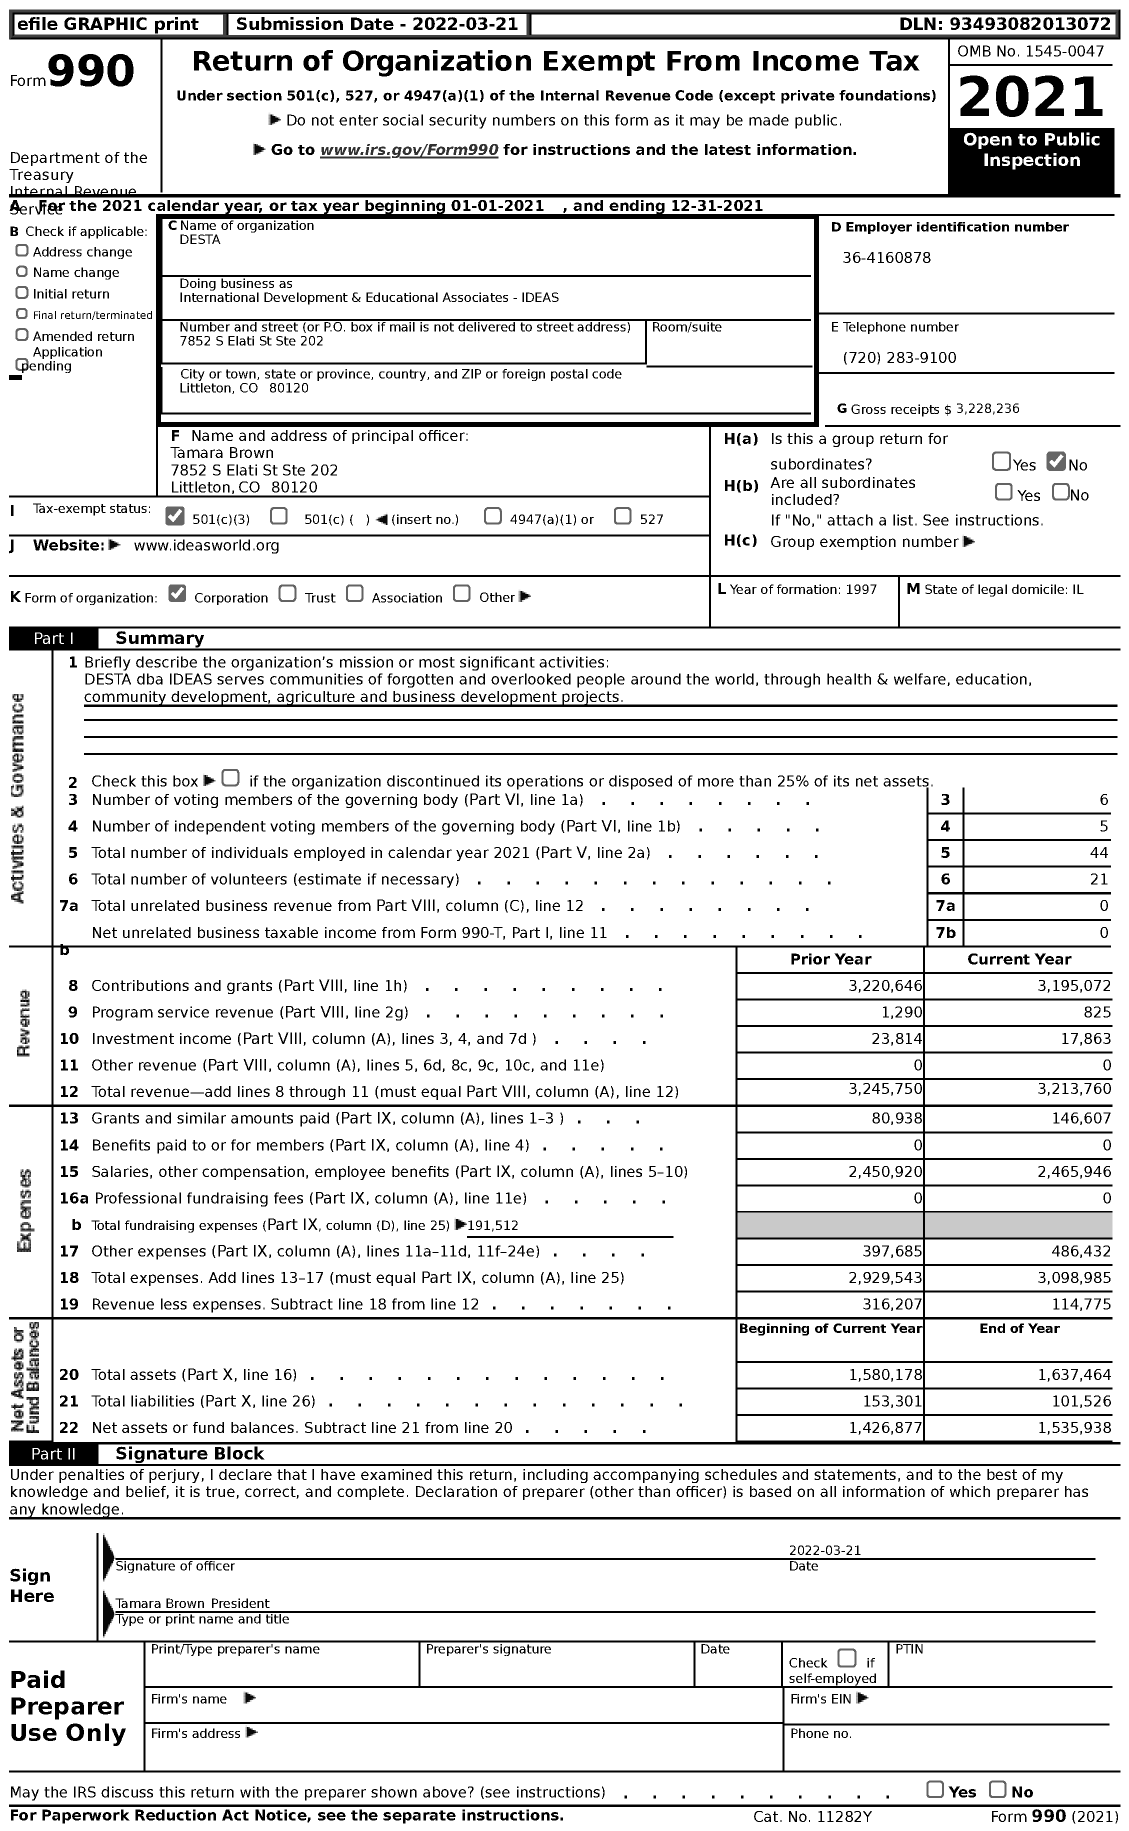 Image of first page of 2021 Form 990 for International Development & Educational Associates - IDEAS